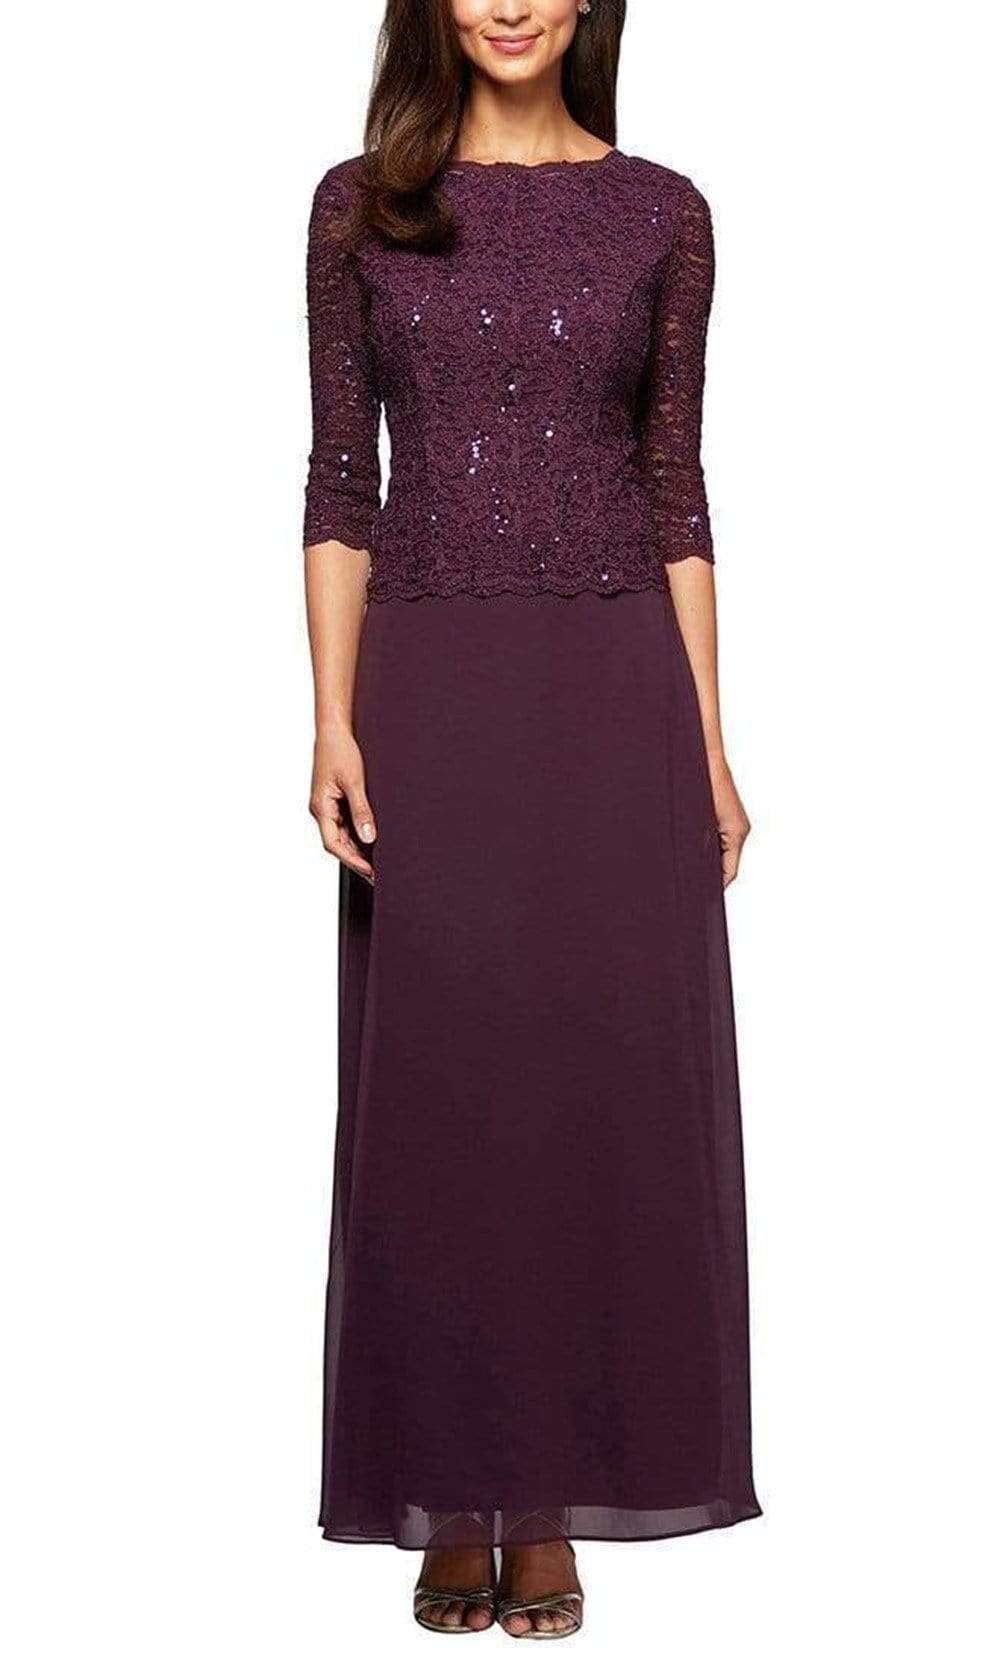 Image of Alex Evenings - 212318 Quarter Sleeve Sparkly Lace and Chiffon Dress